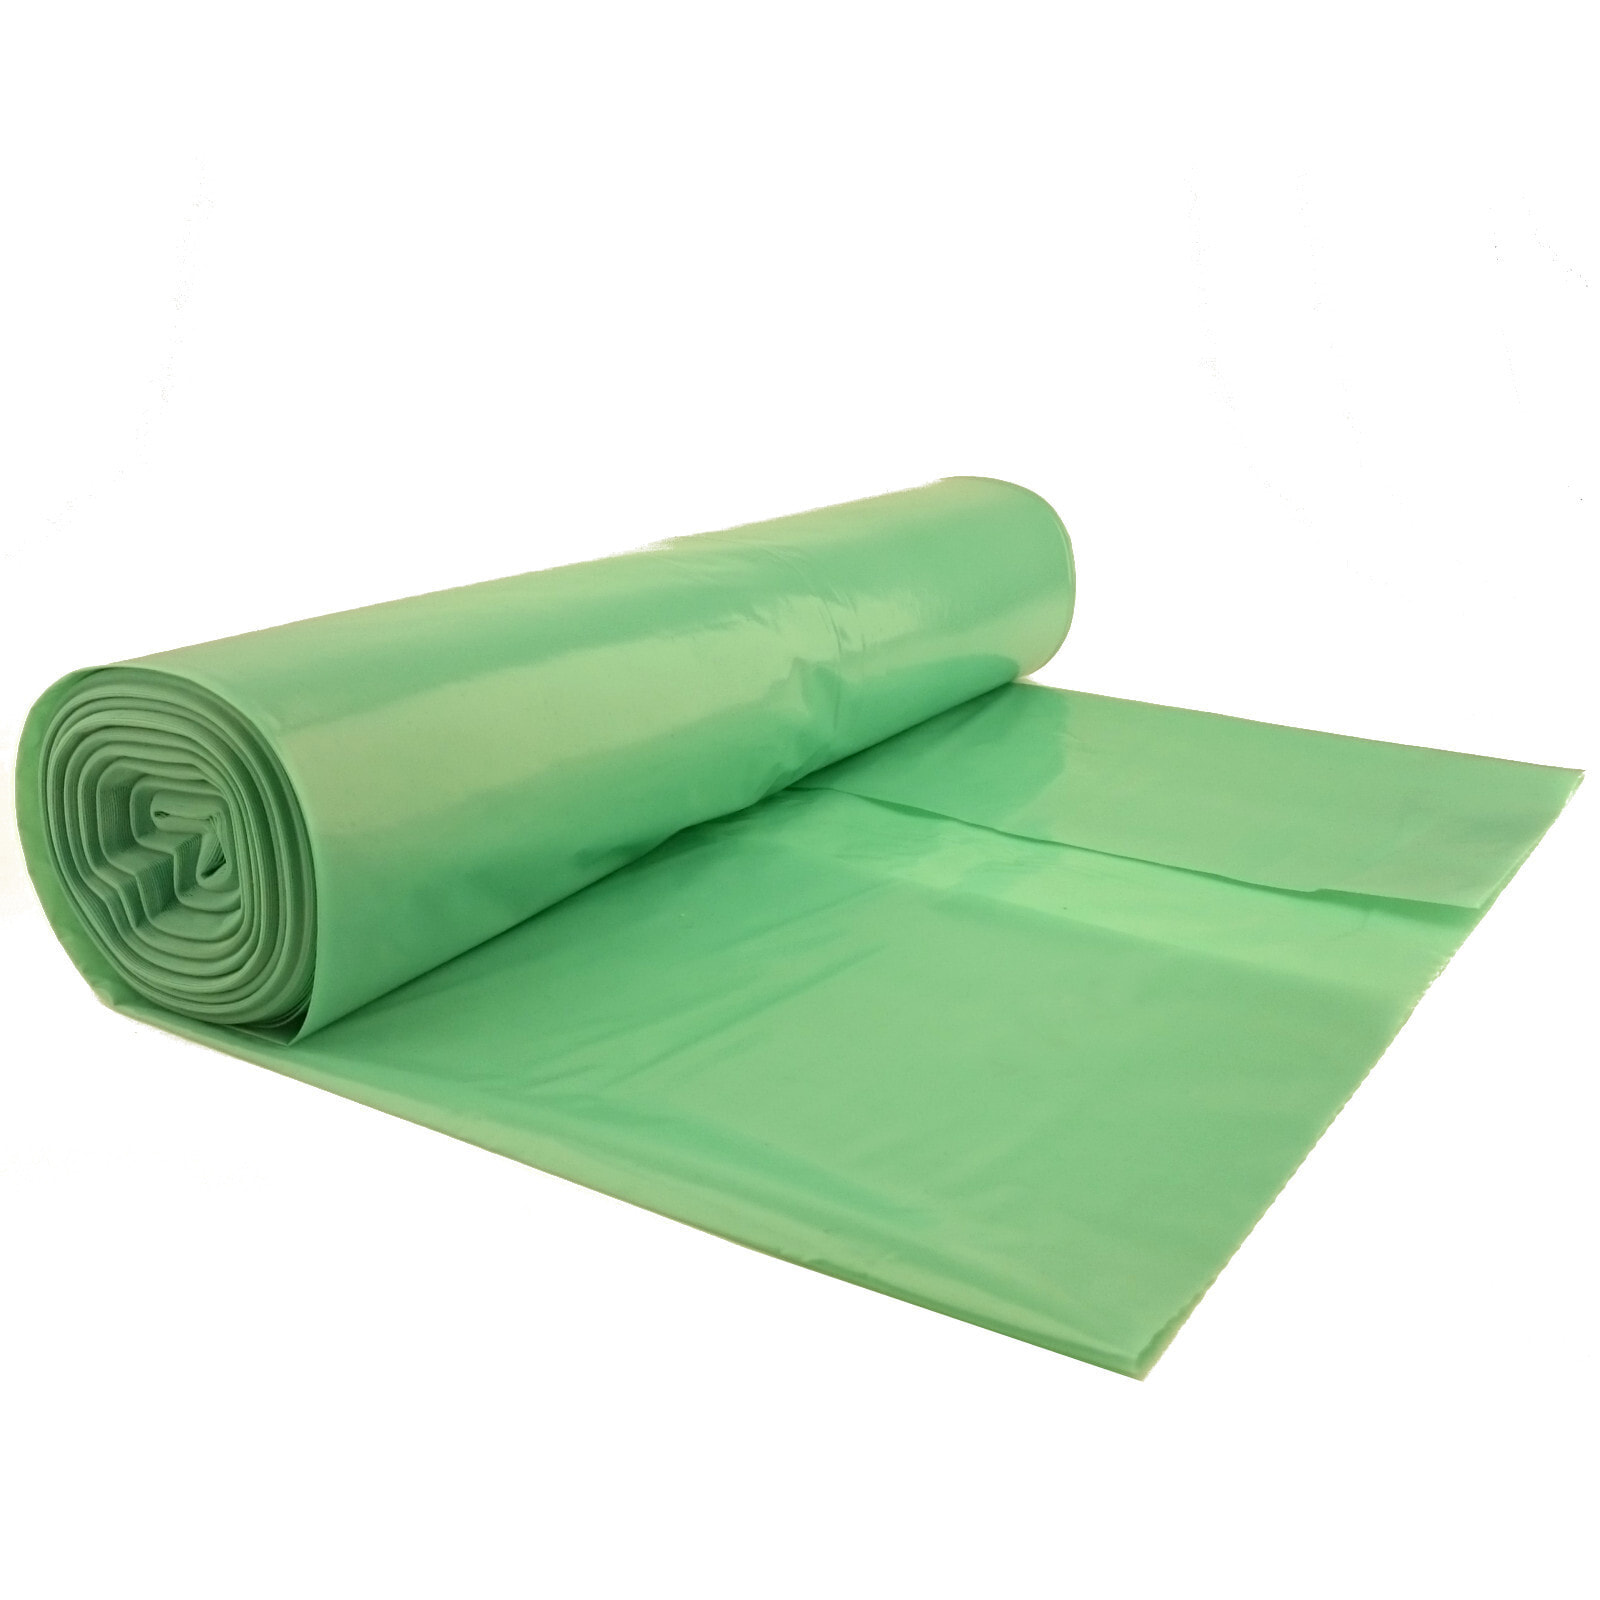 50 micron thick garbage bags. durable roll 25 pcs. - green 120L